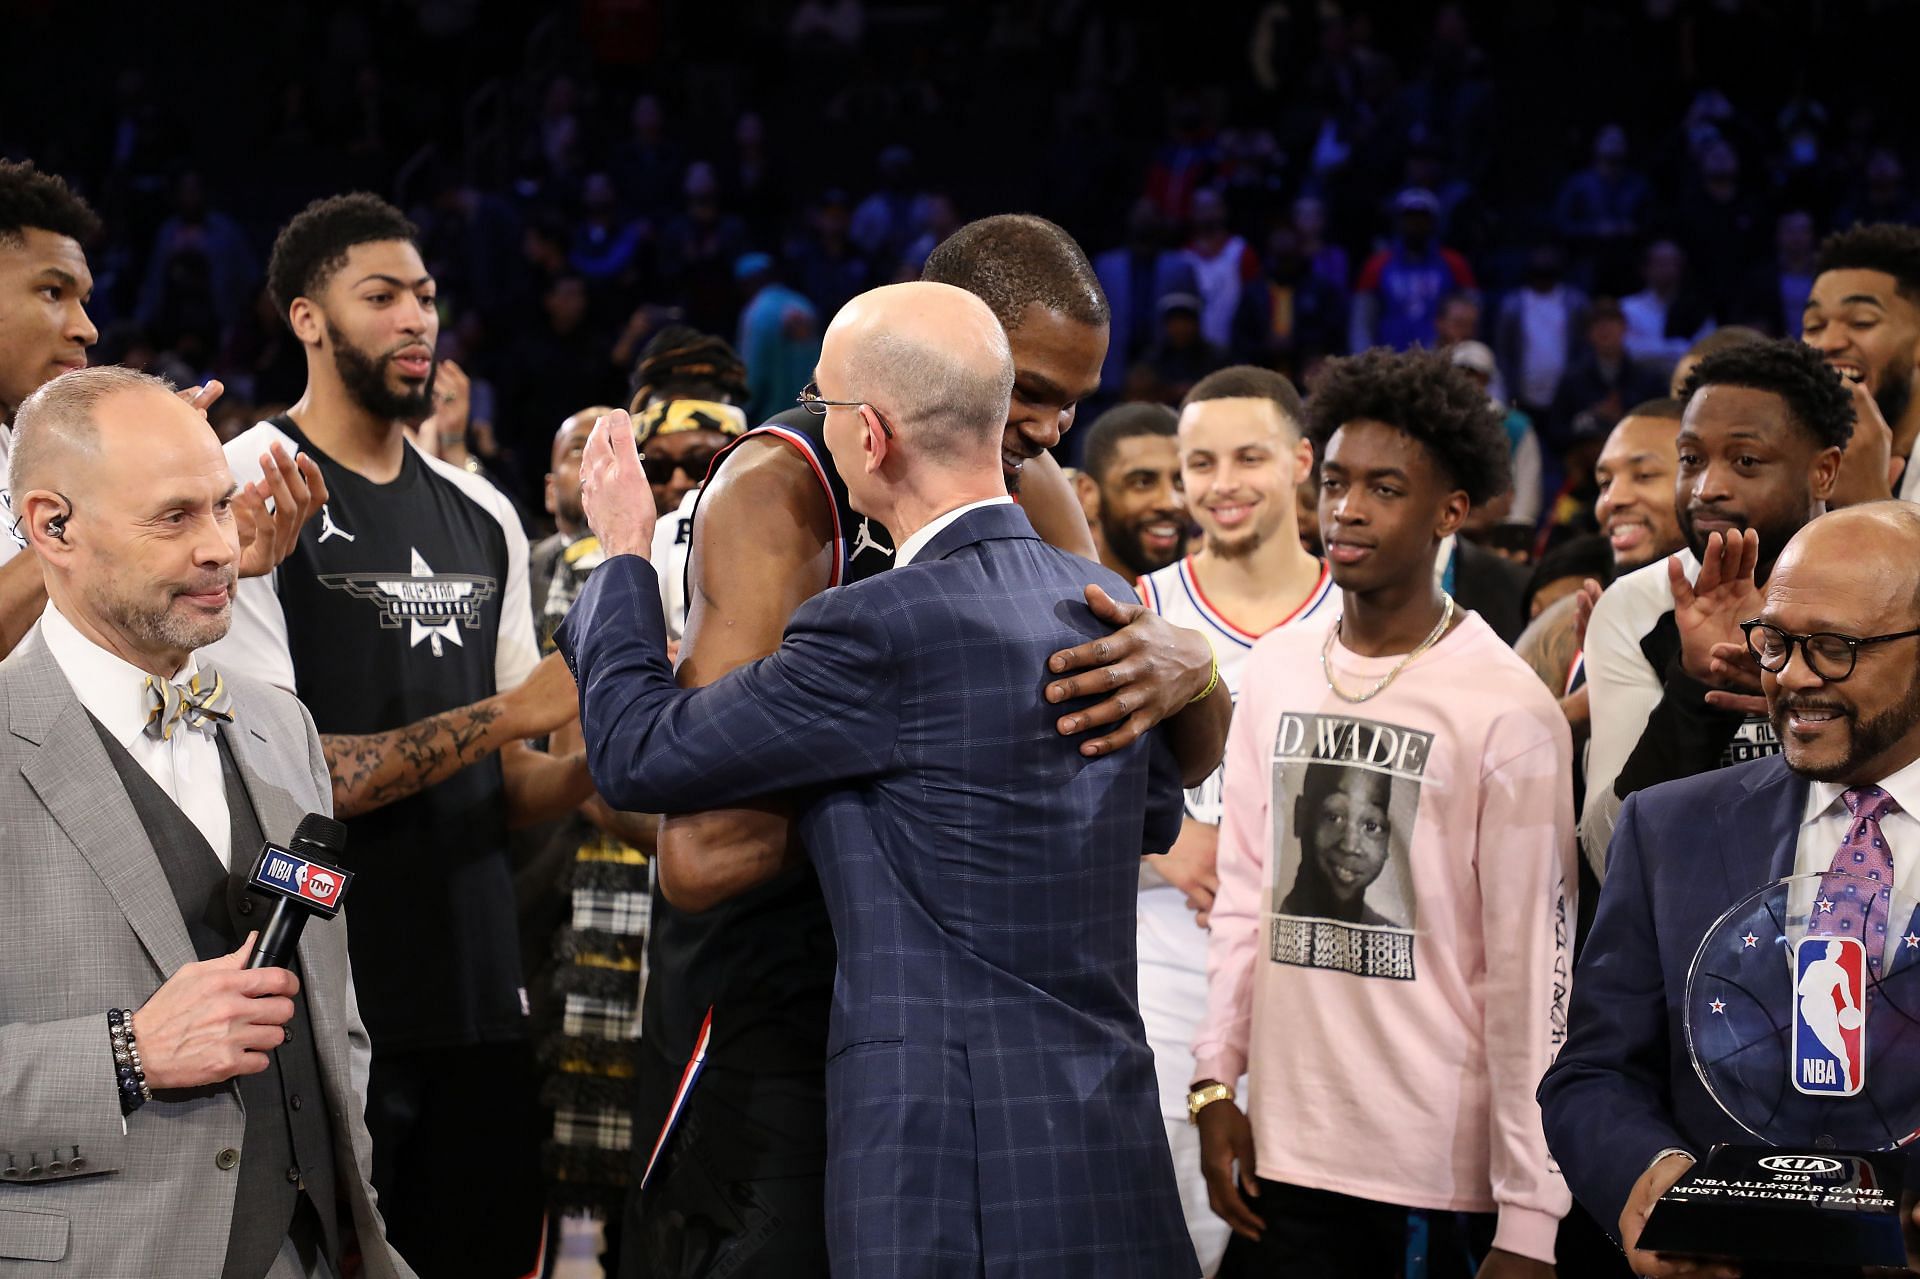 Kevin Durant hugging NBA Commissioner Adam Silver after winning the 2019 NBA All-Star Game MVP award